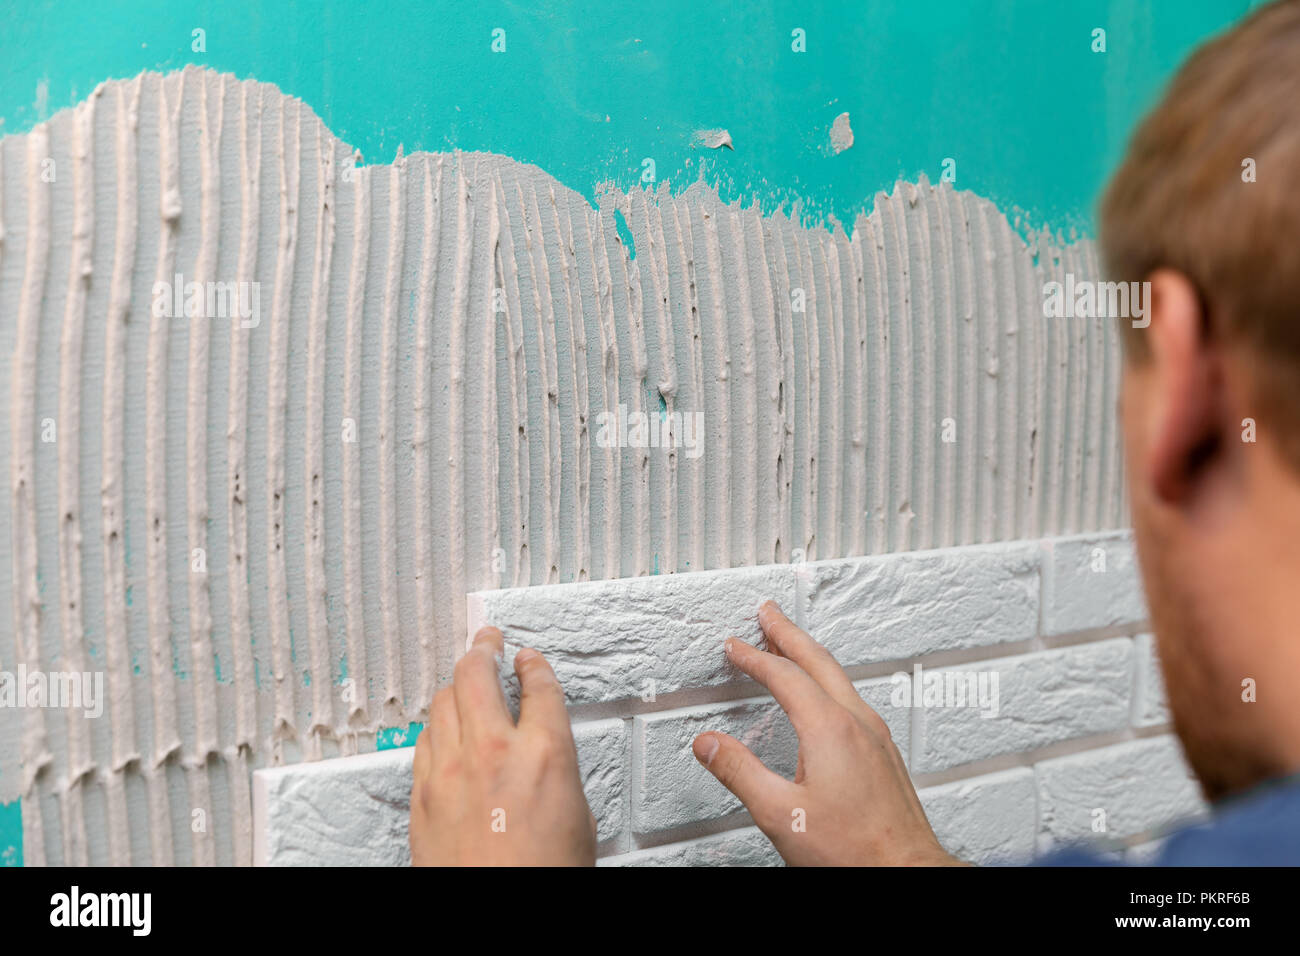 tiler laying brick tiles on the wall indoors Stock Photo